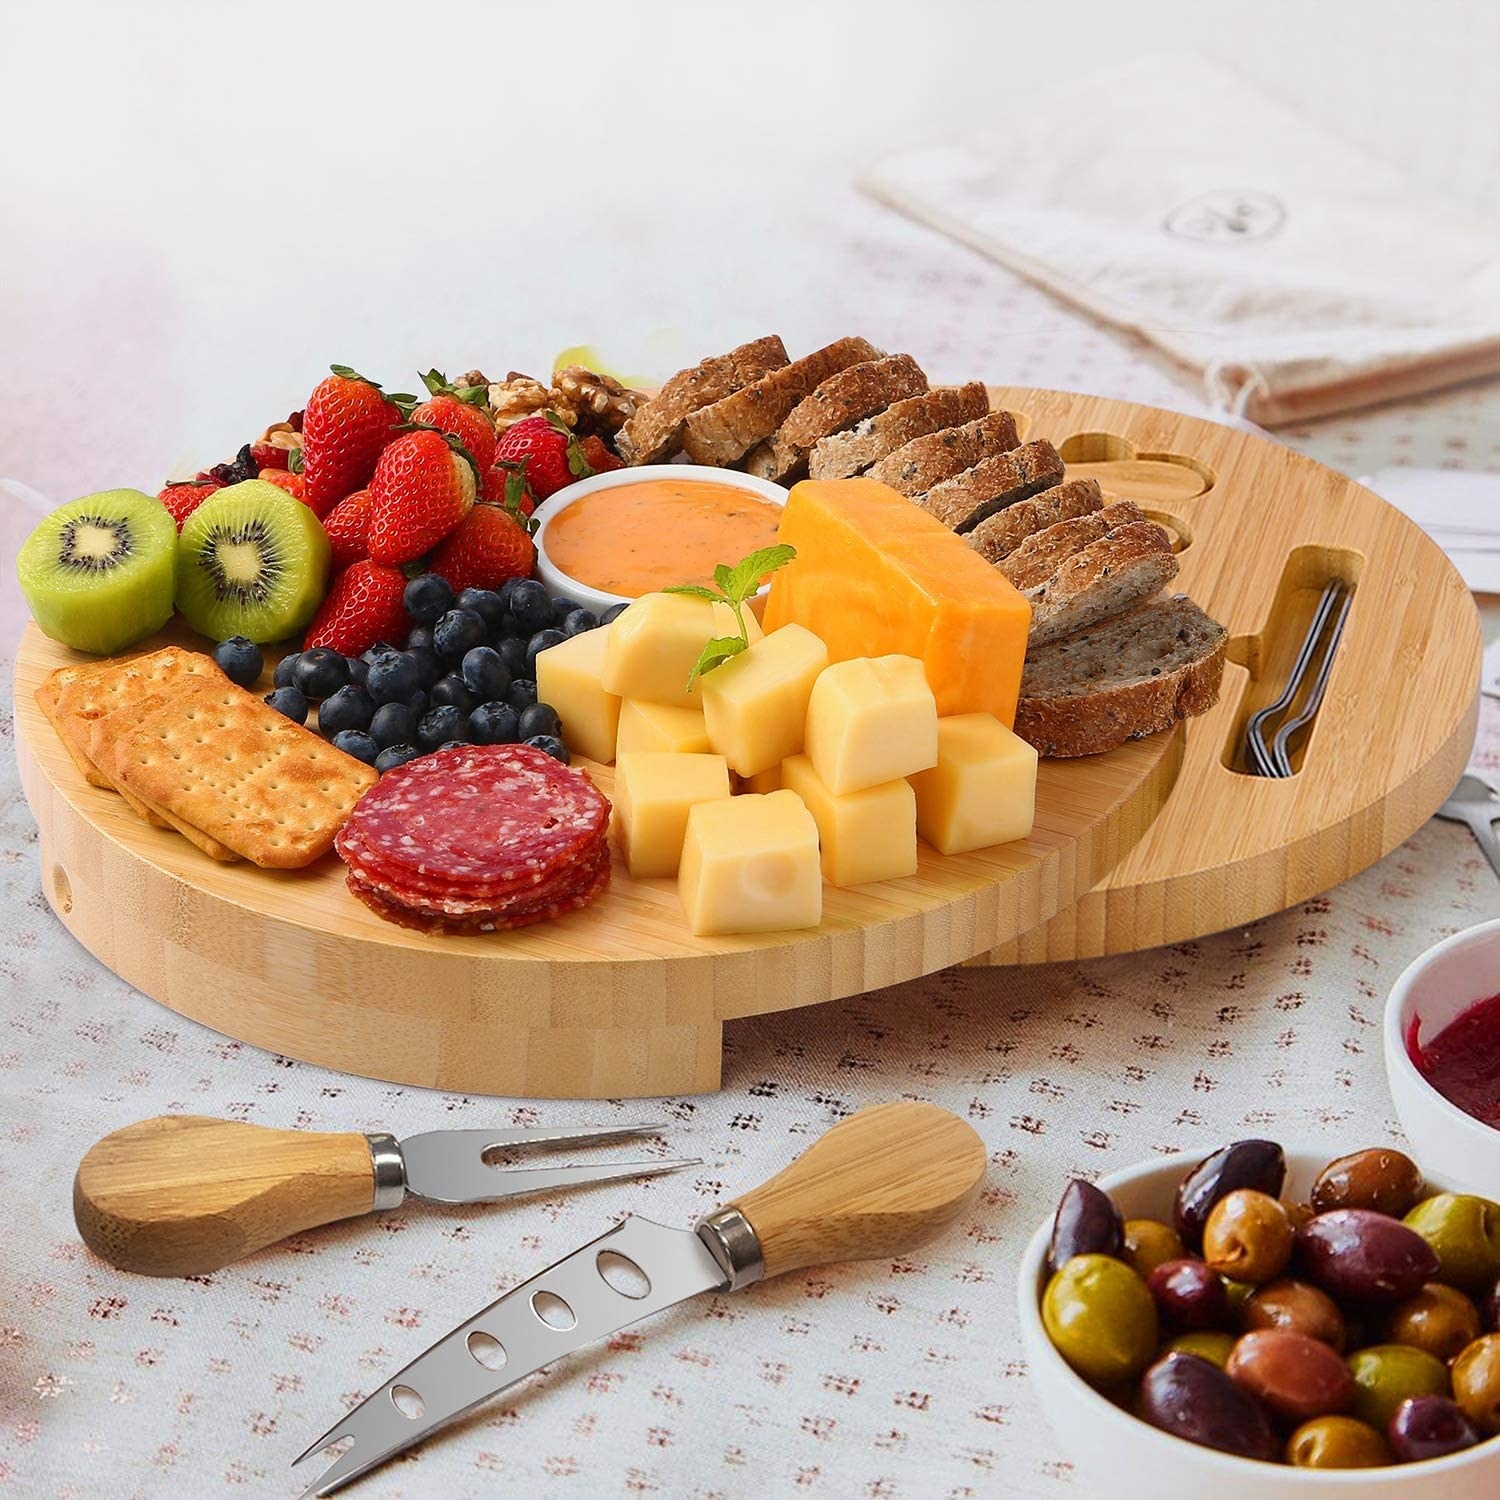 A round wooden board filled with cheese, fruit, meats, and bread